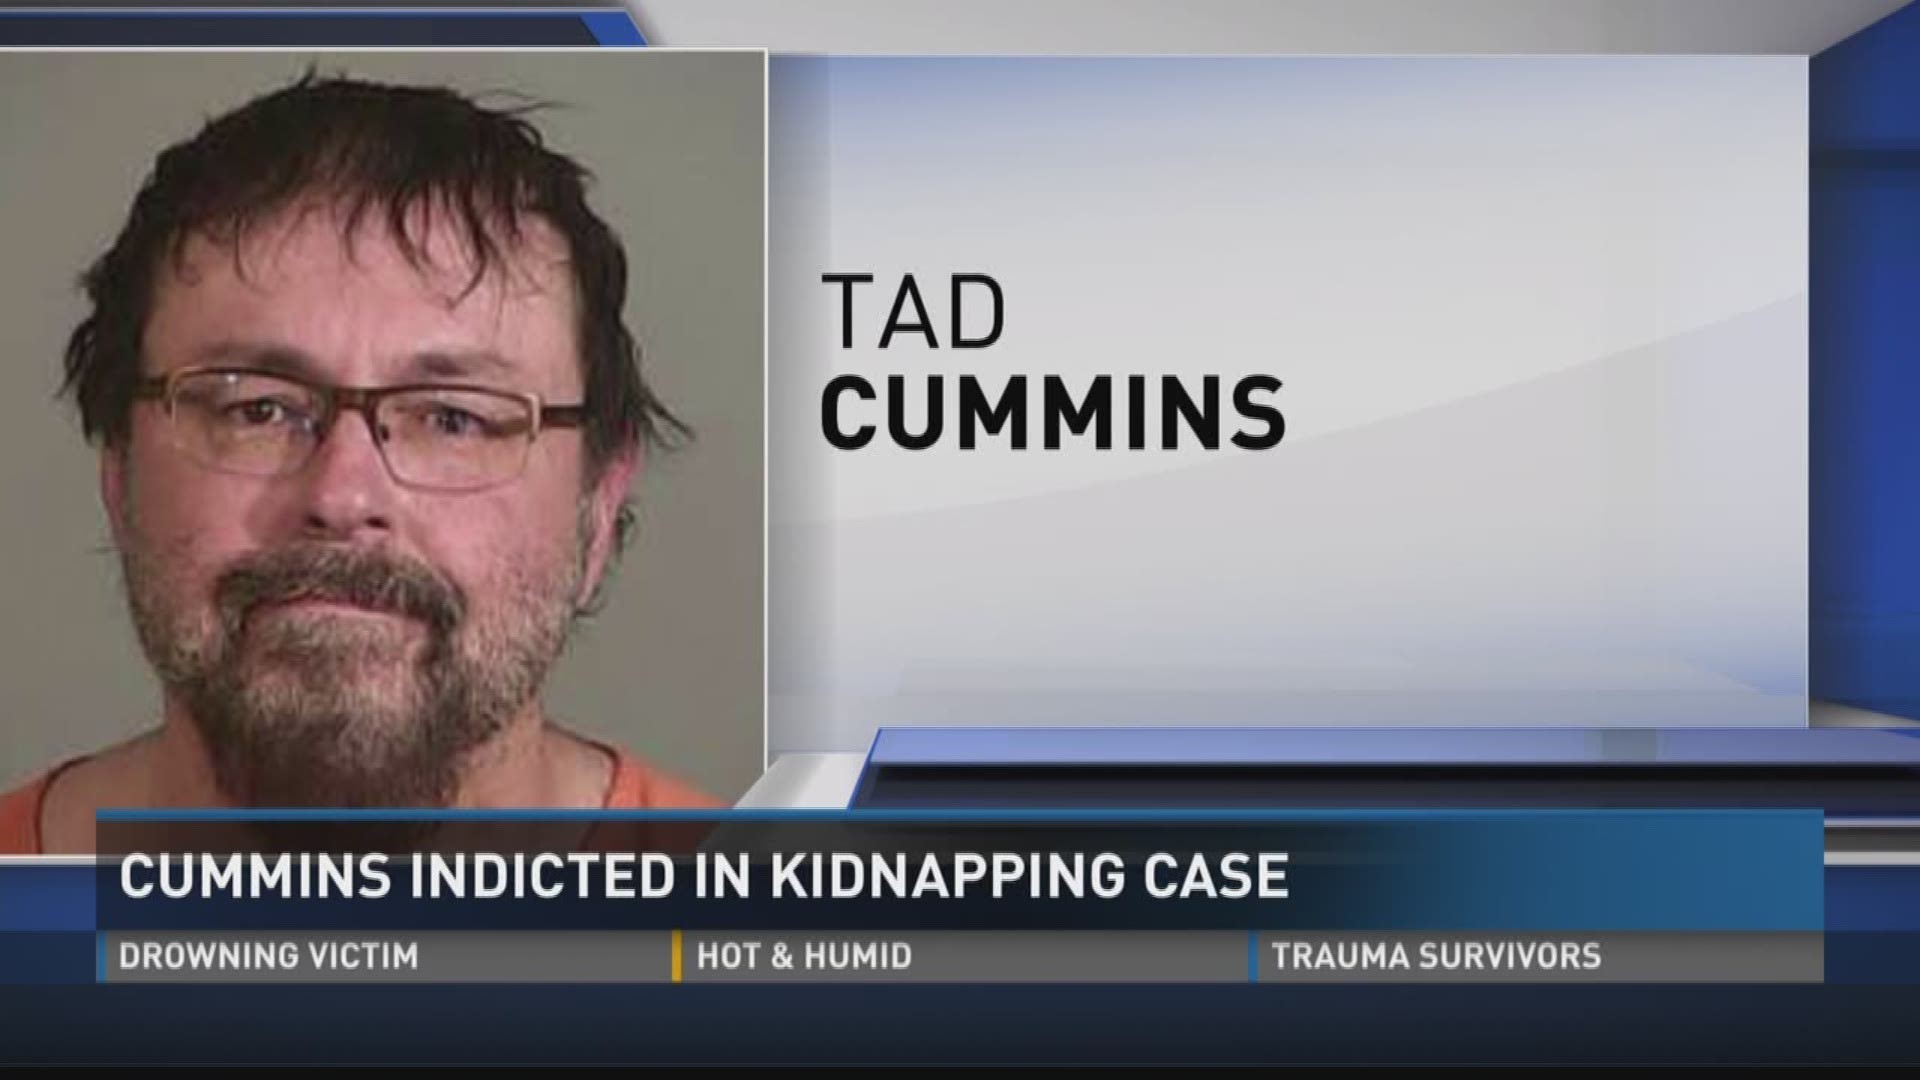 A federal grand jury indicted Tad Cummins on two charges.